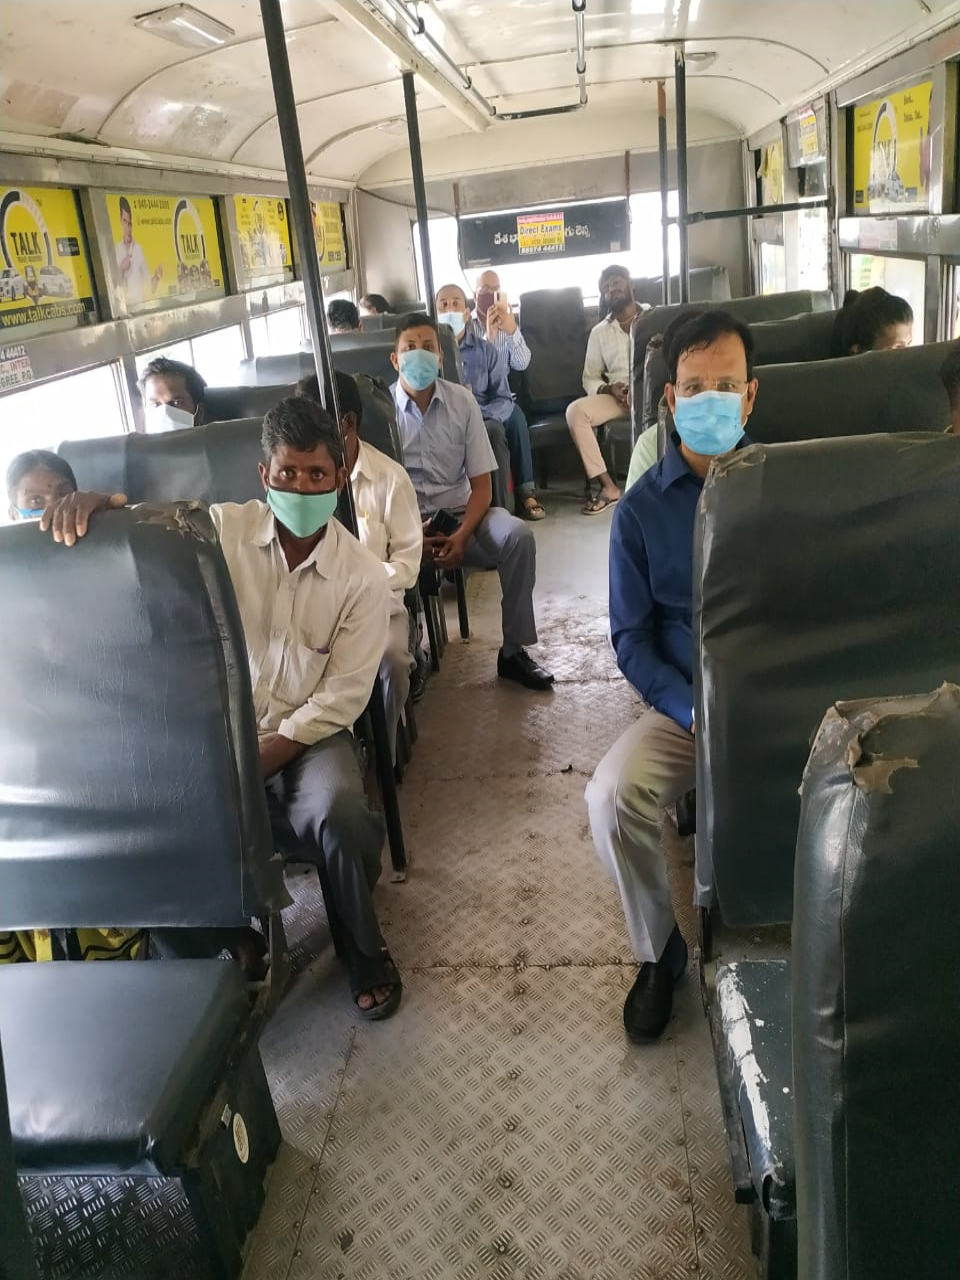 INCOGNITO TRAVEL IN TSRTC BUS BY M.D.